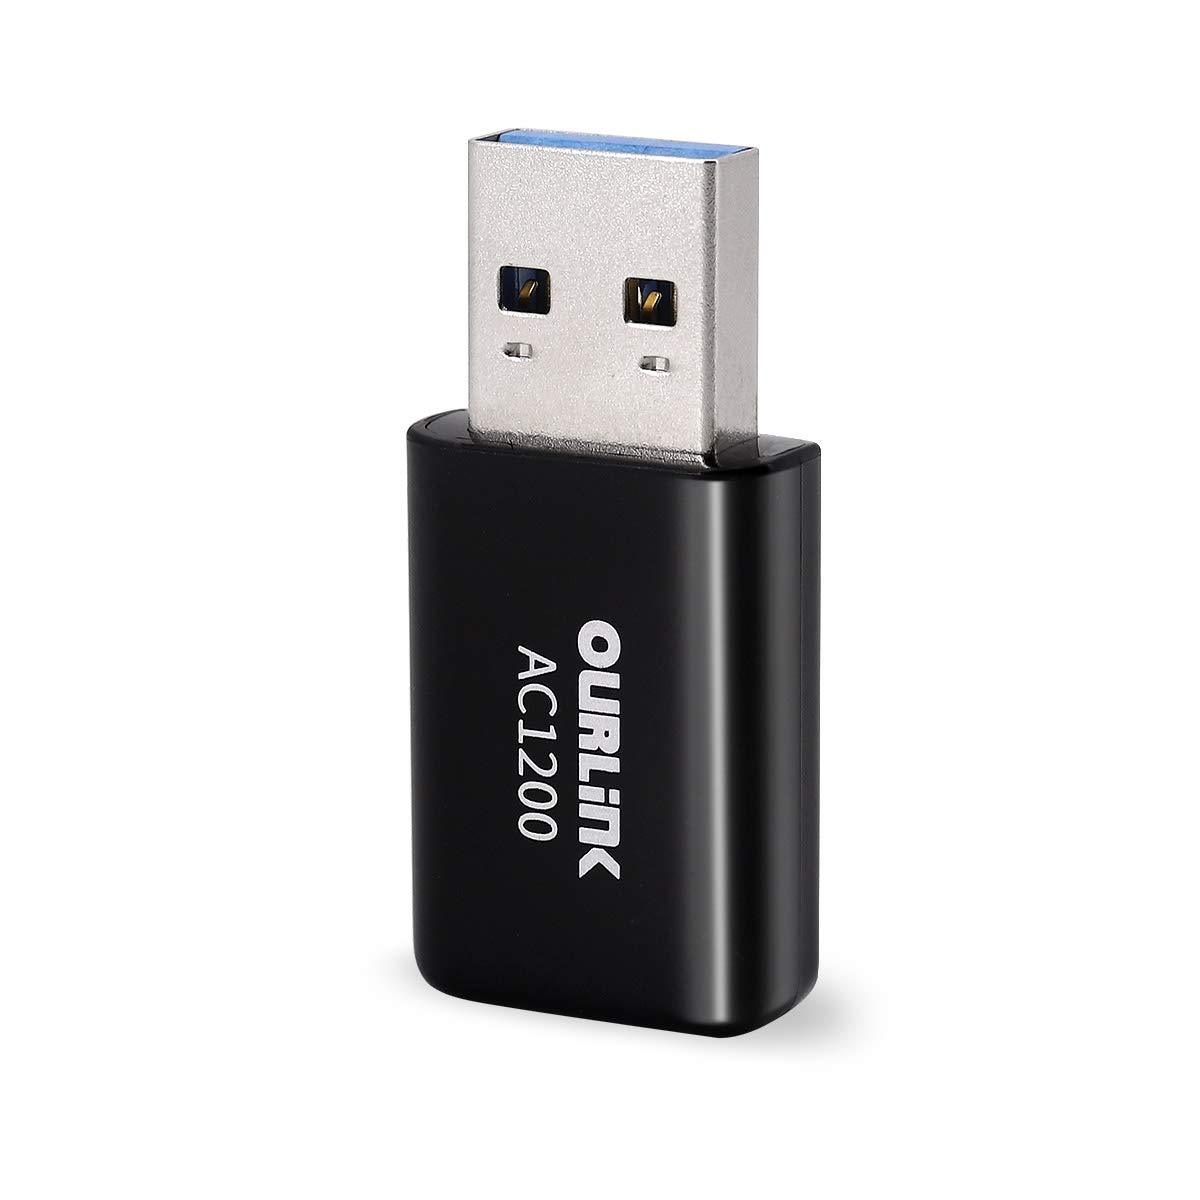 Ourlink USB WiFi Adapter 1200Mbps USB 3.0 - Store 974 | ستور ٩٧٤